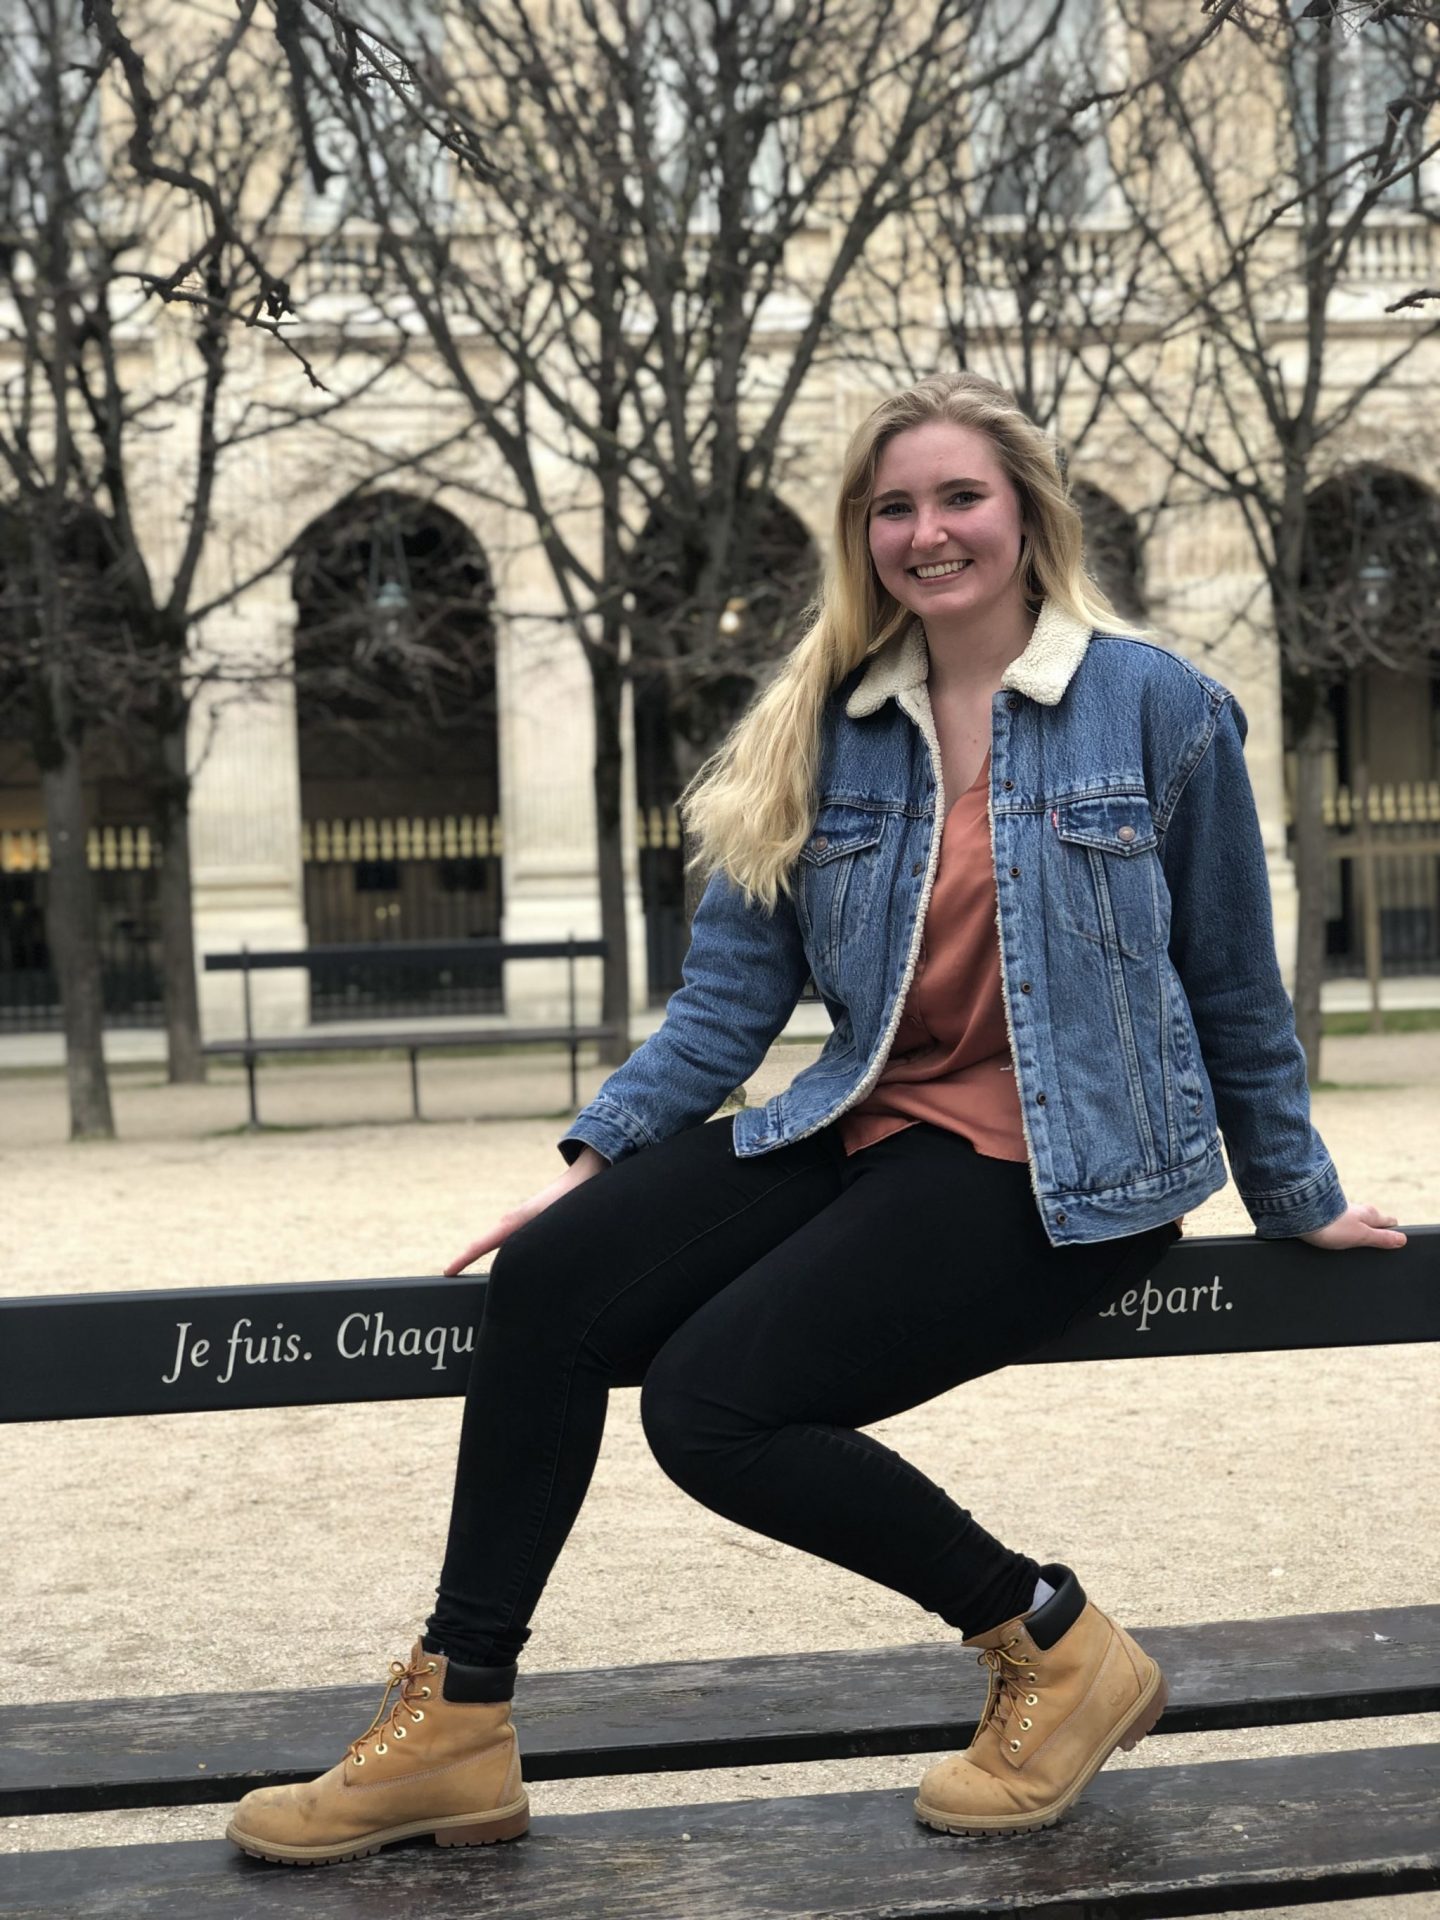 My week 10: French Action and visiting Versailles